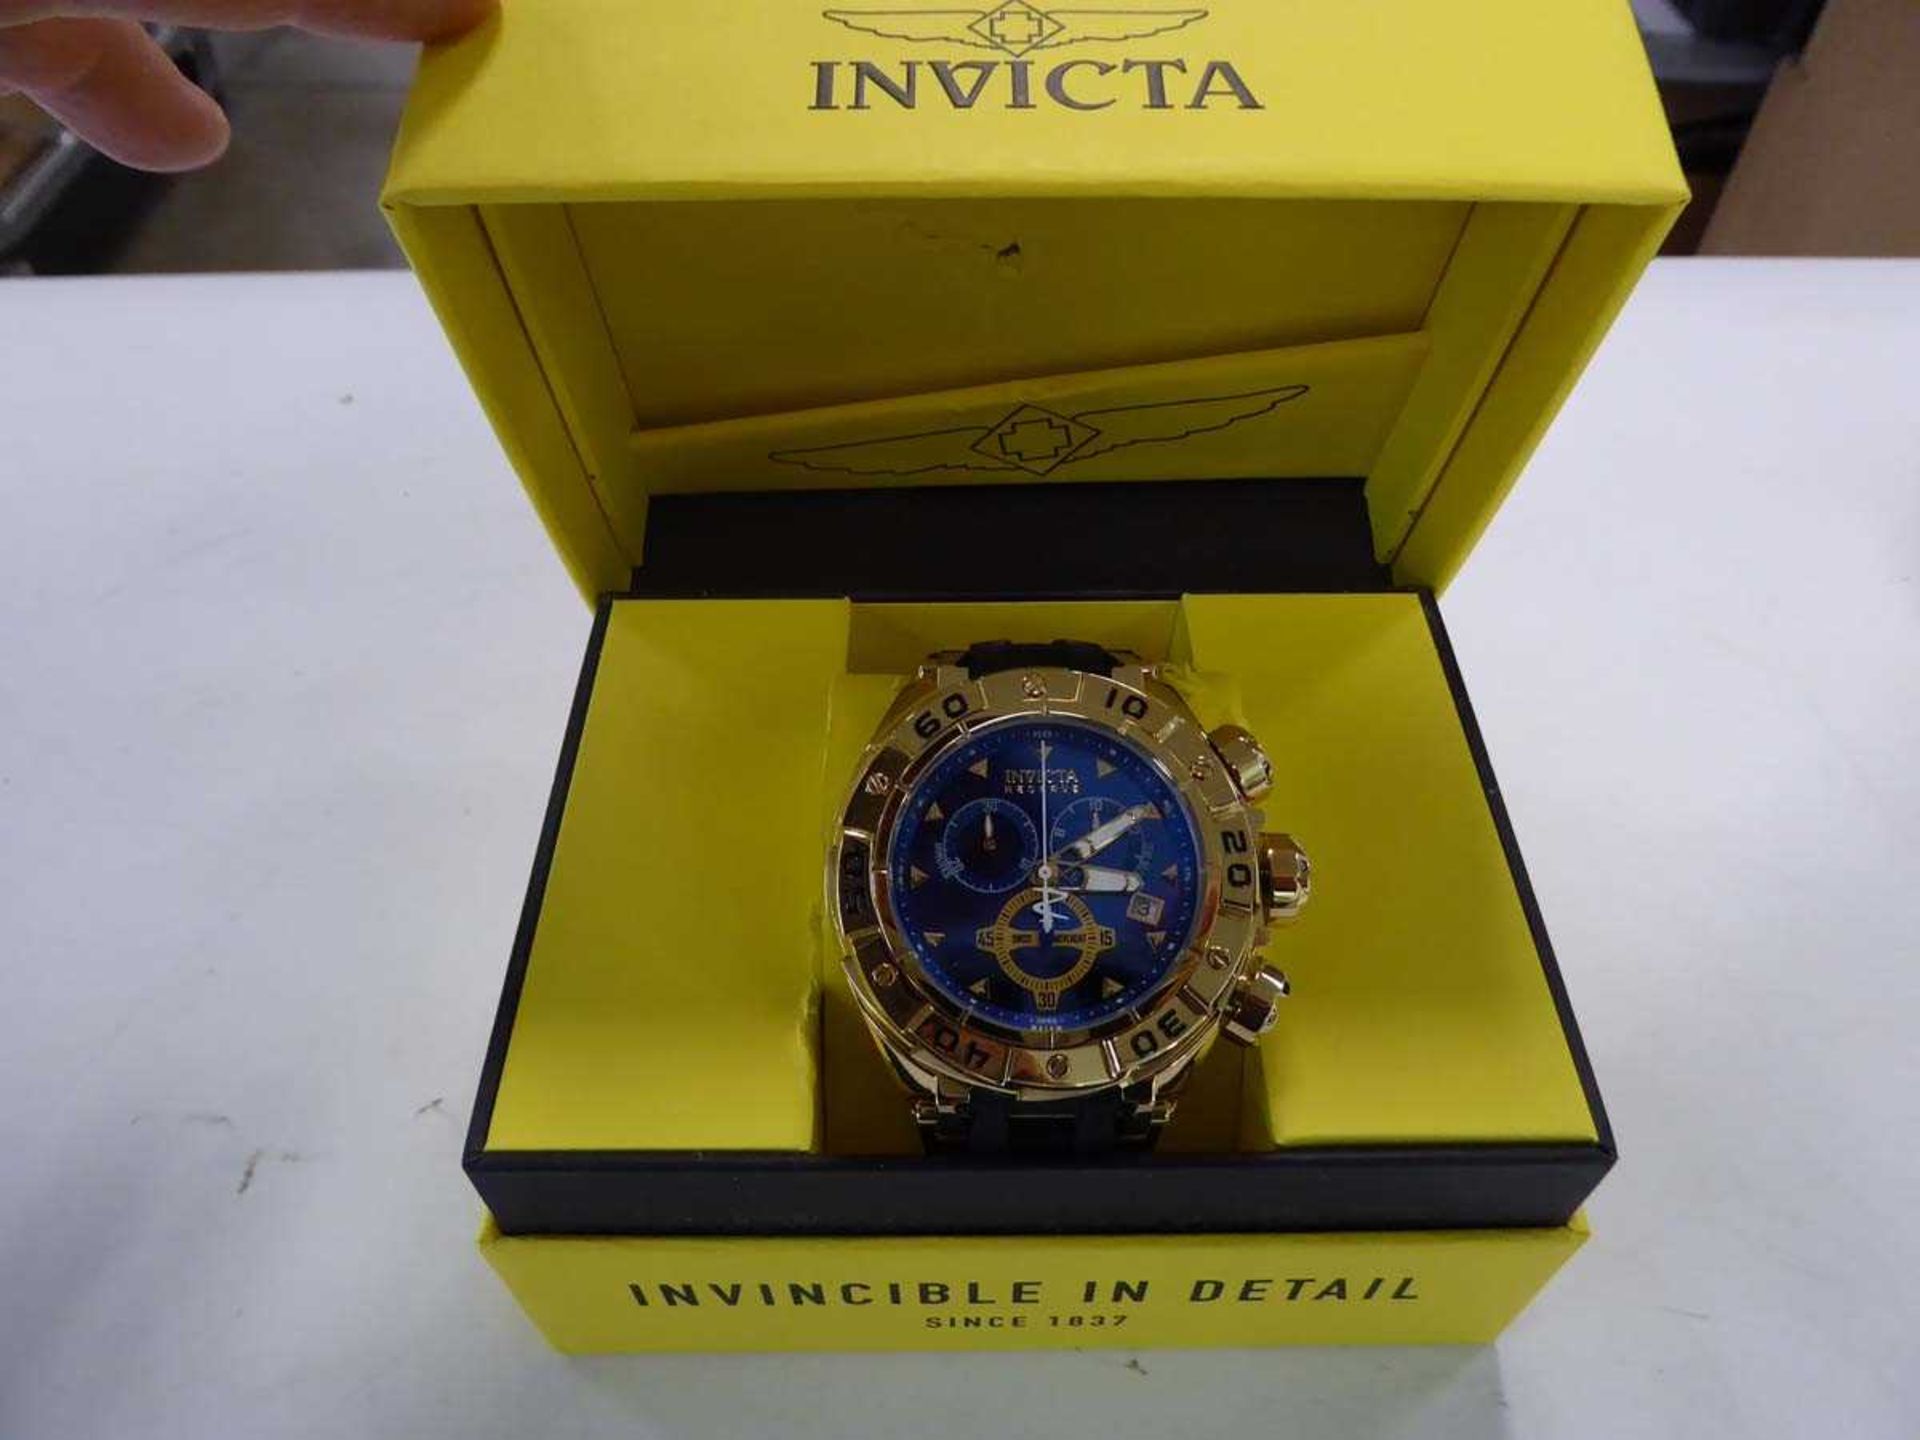 +VAT Invicta Reserve sub-dial Swiss movement watch with blue face and black strap, boxed